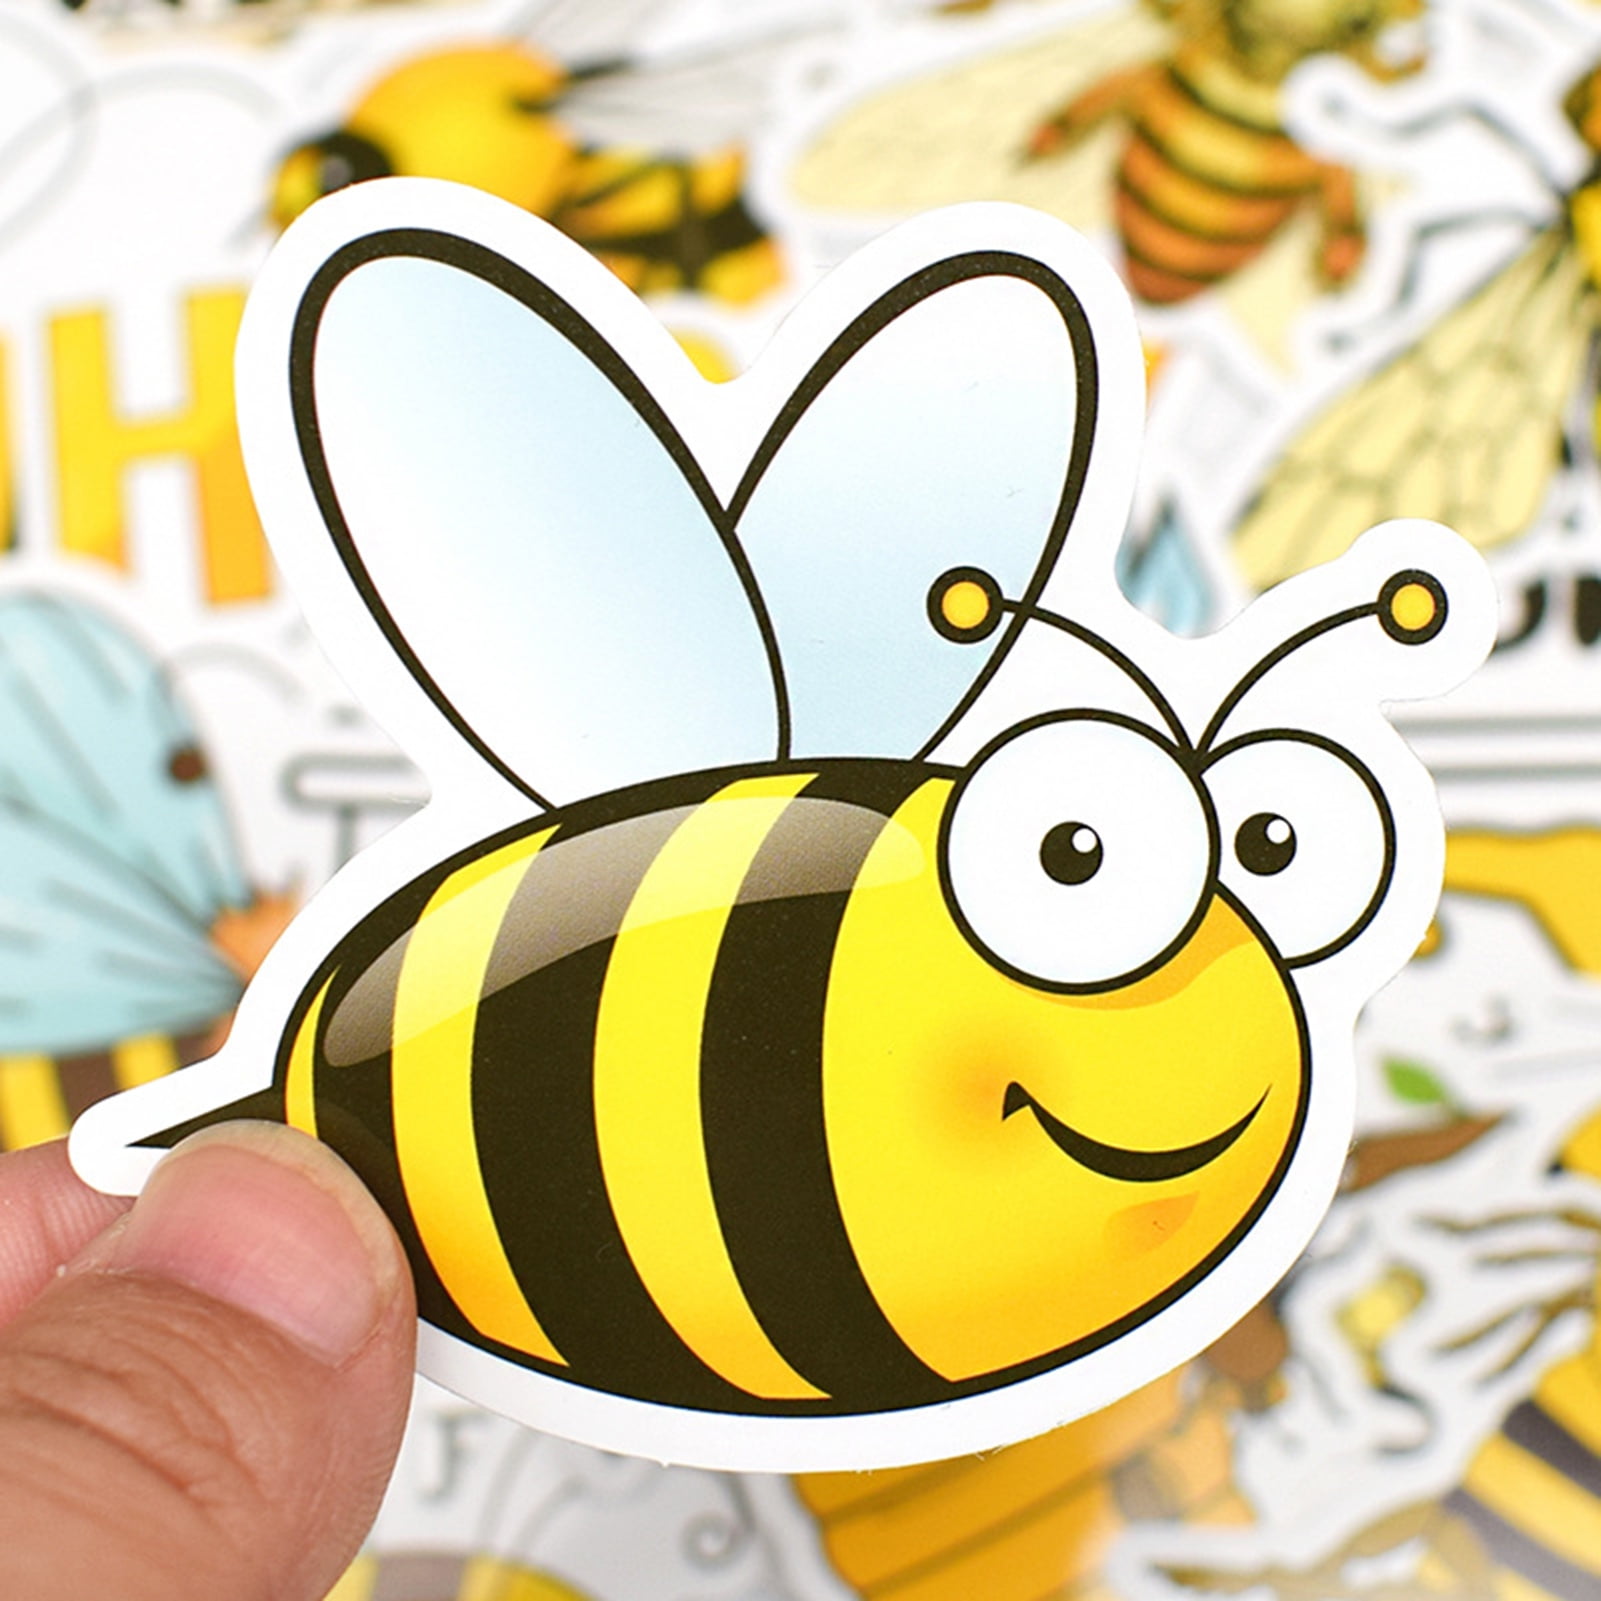 Ludlz Bee Sticker 50PCS 3D Tiny Bumble Flatback Self Adhesive Embellishment  for Card Scrapbooking DIY Decoration Non-repetitive Bee Pattern PVC  Stationery Yellow Little Bee Decal 